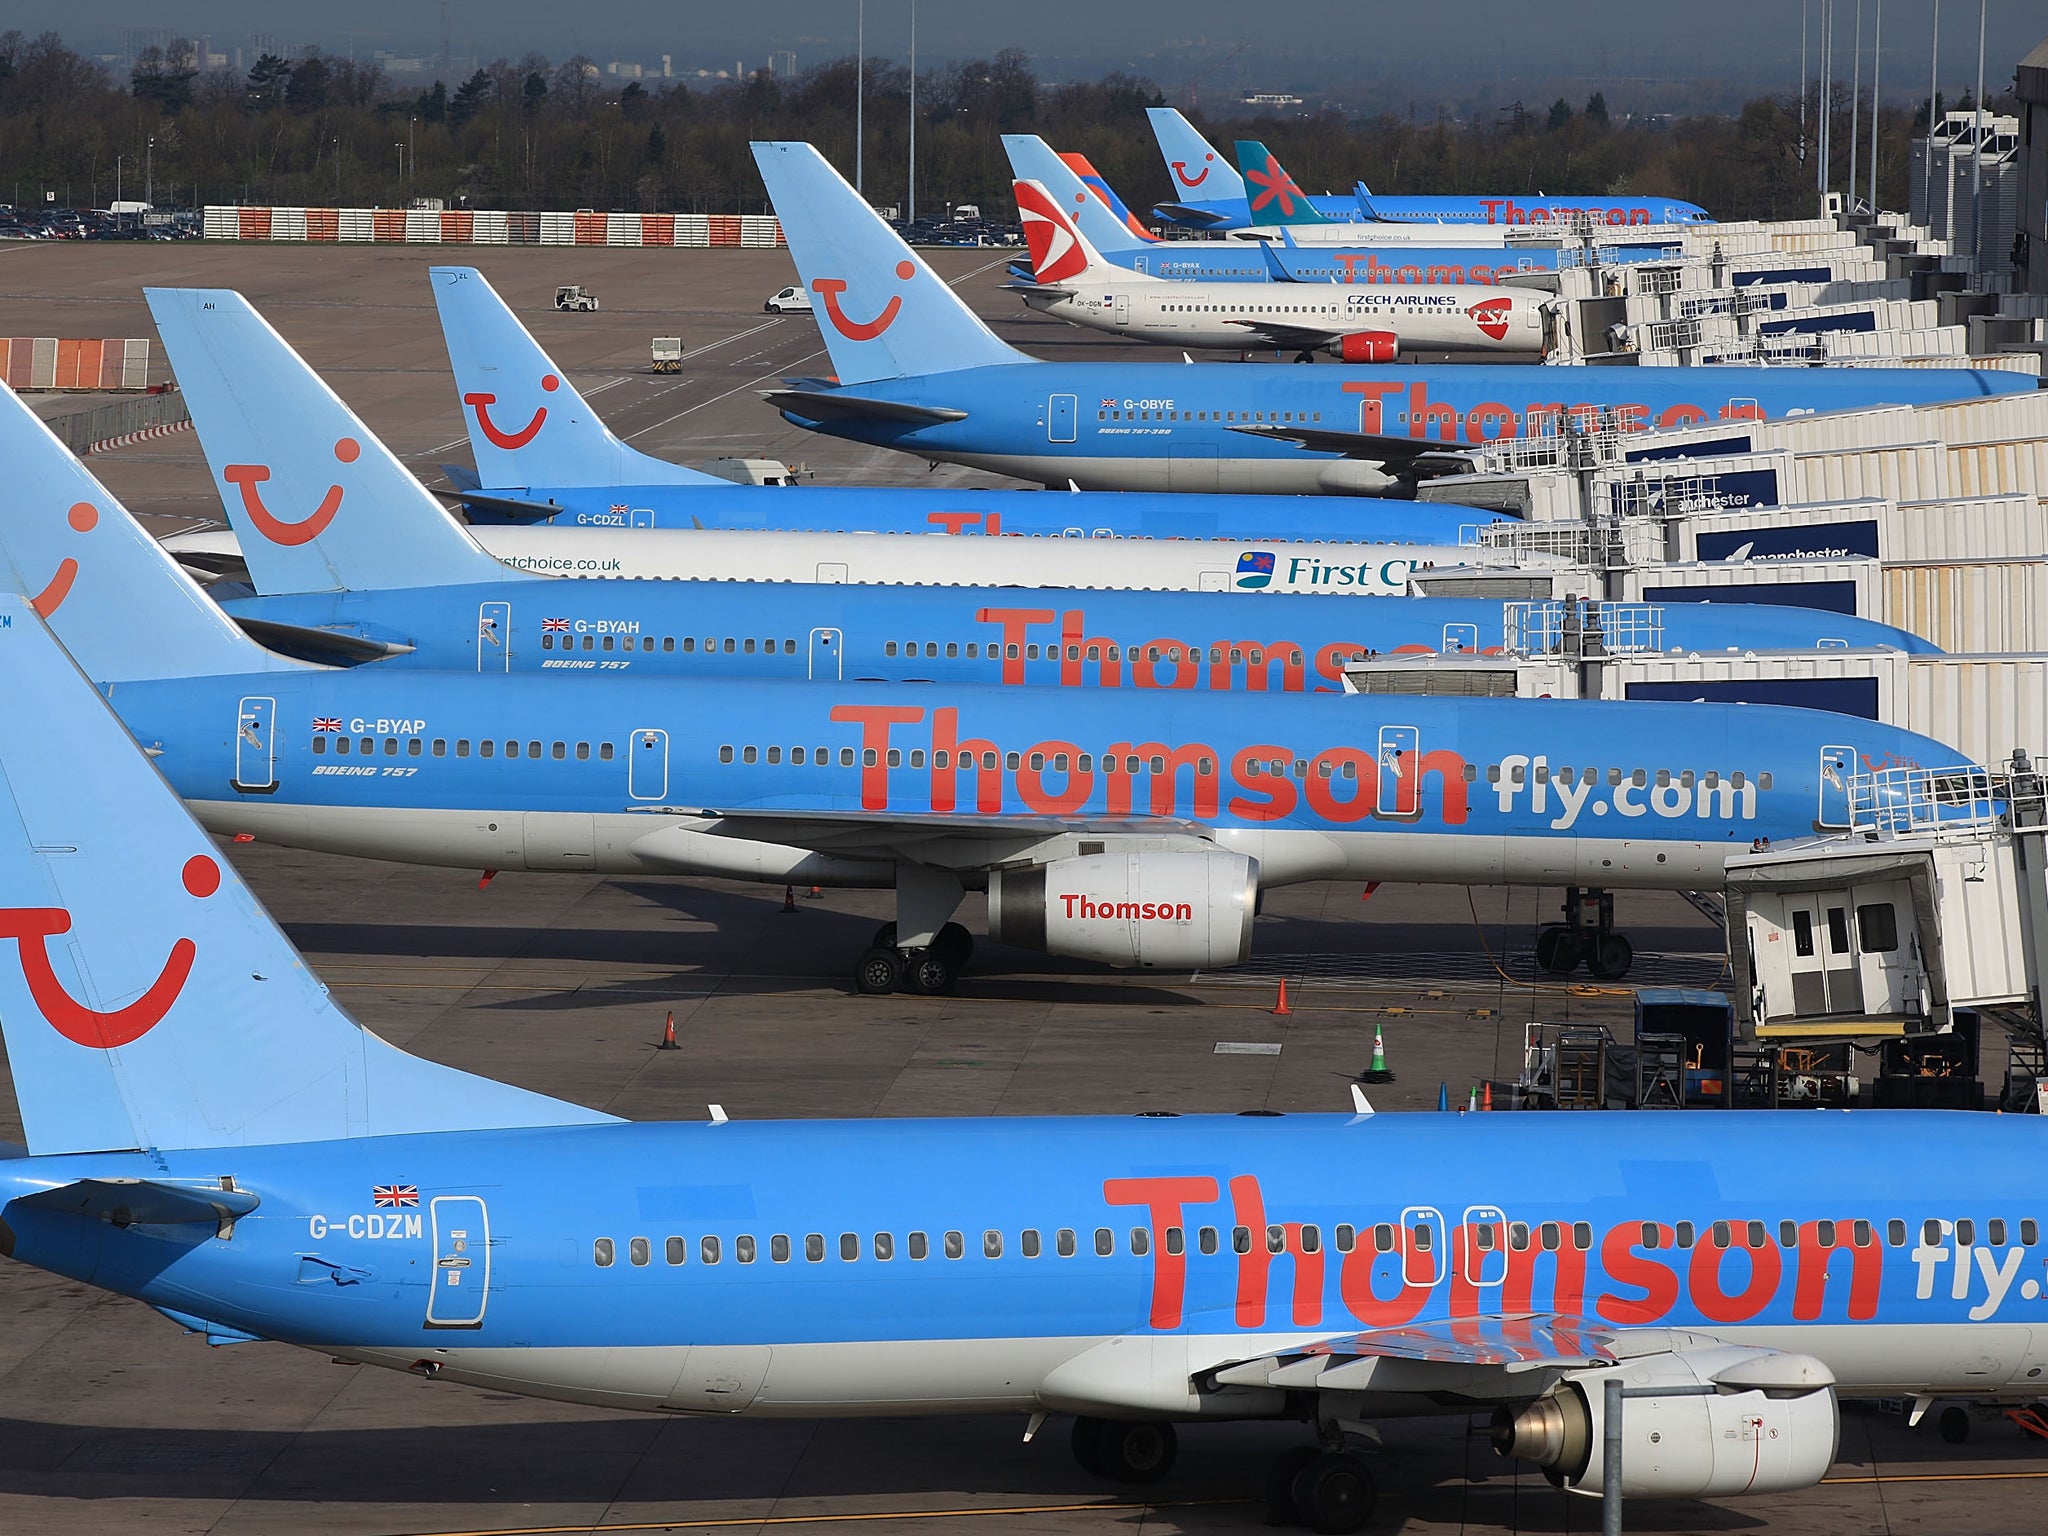 The woman who died on the Thomson flight from Majorca to Glasgow was reported to be in her 60s